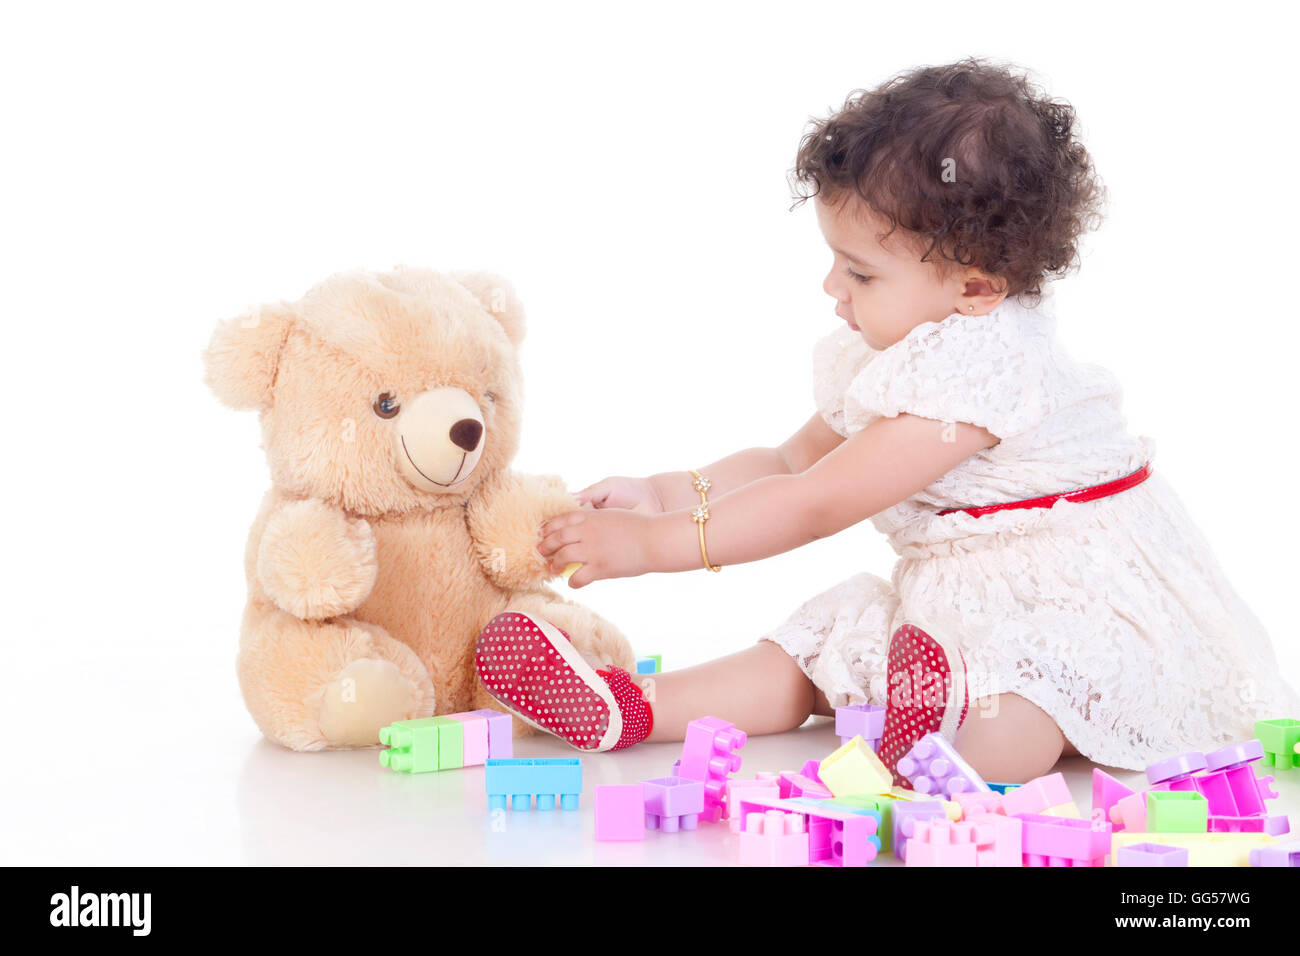 Full length of cute girl playing with stuffed toy over white background Stock Photo